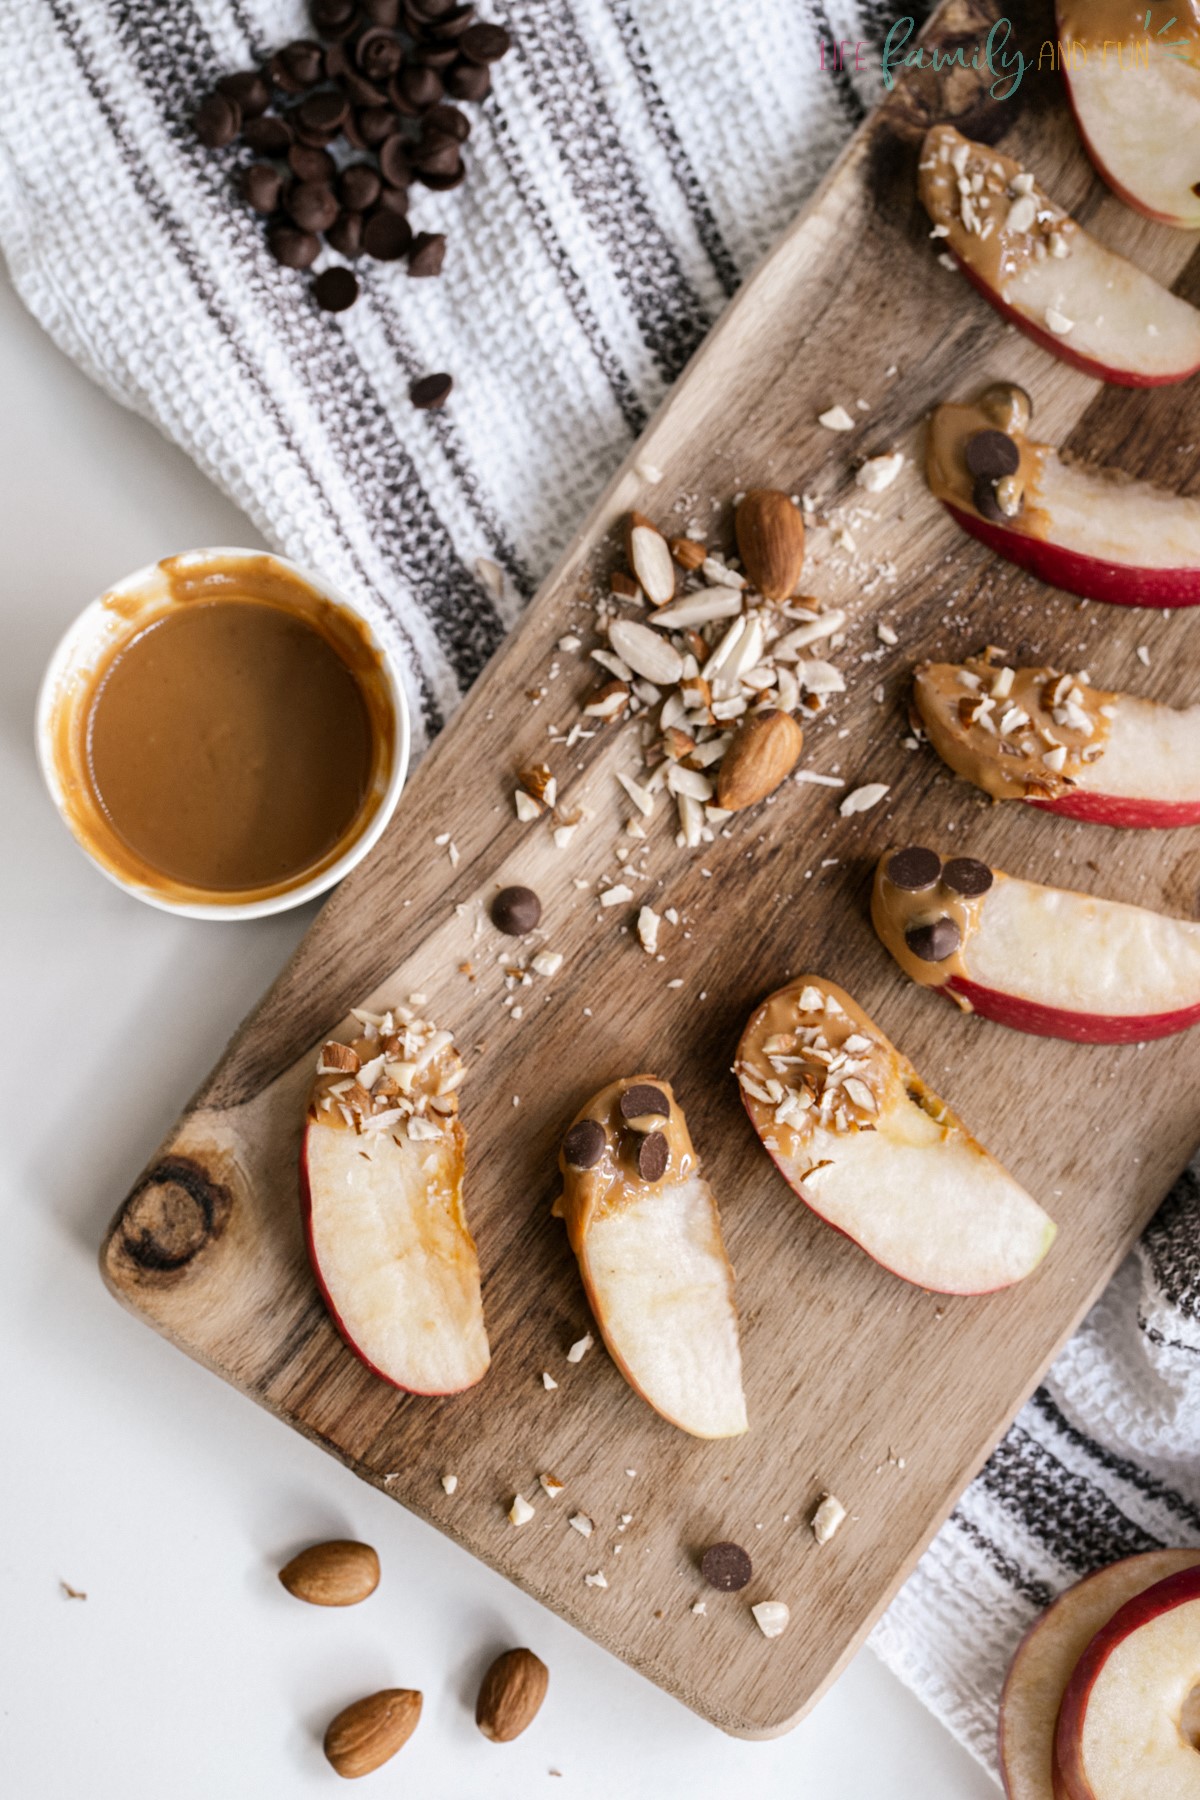 Apple Slices with Peanut Butter - top